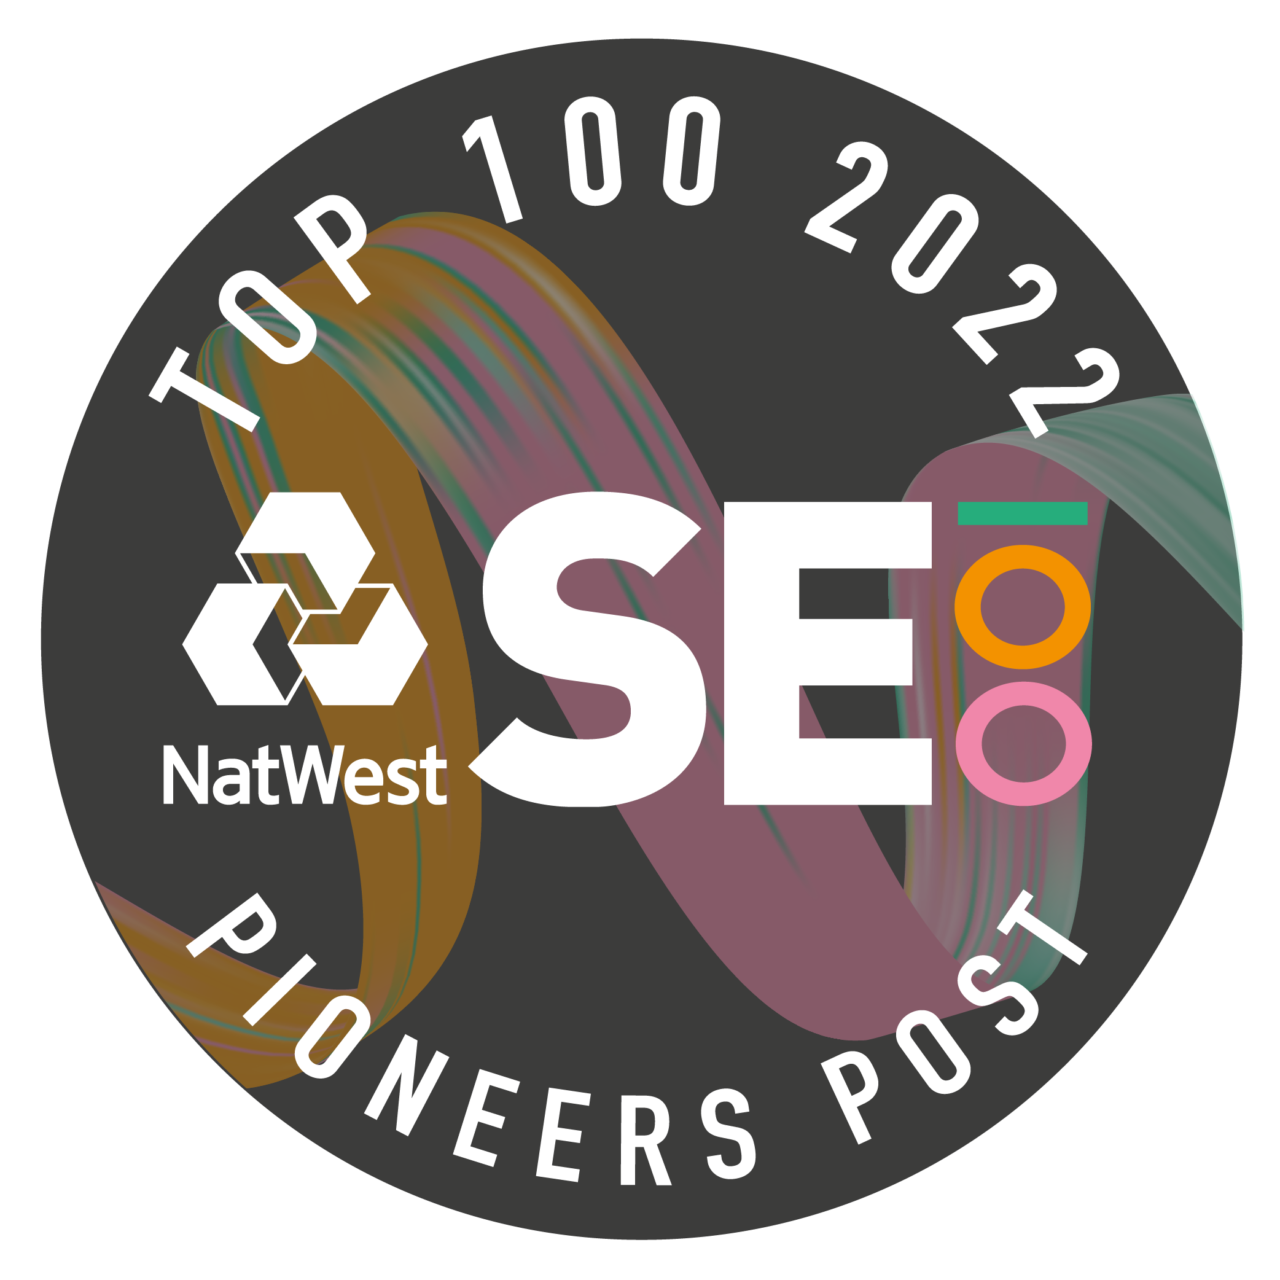 We have been named one of the top 100 Social Enterprises in the SE100 Index and Social Business Awards run by NatWest and Pioneers Post